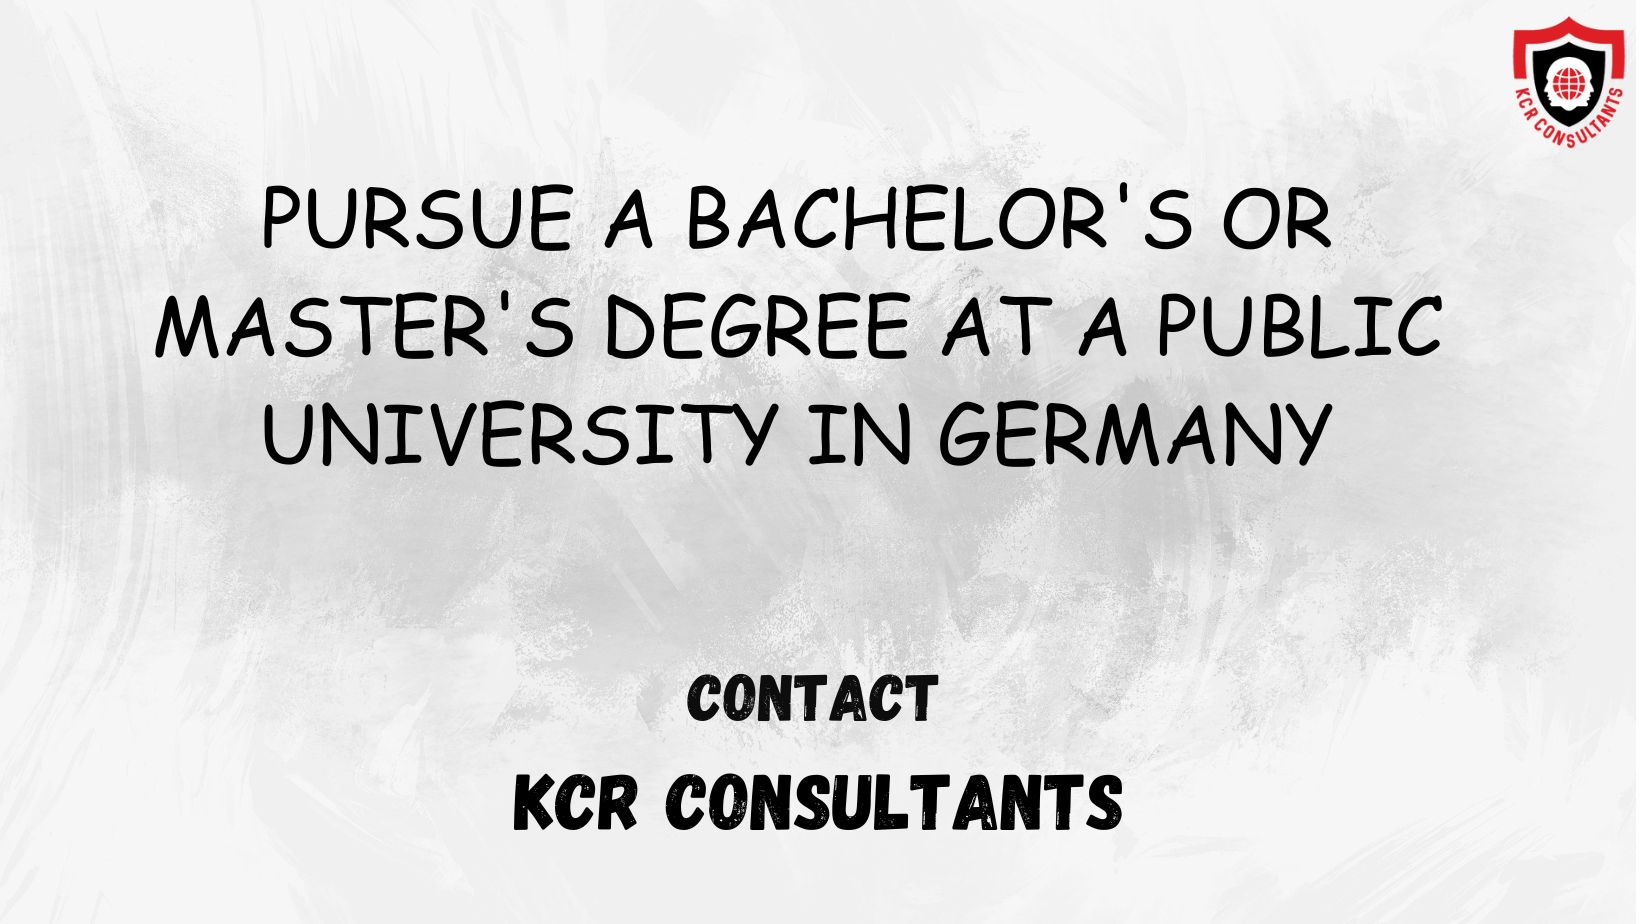 Biberach University of Applied Sciences - Contact us - KCR CONSULTANTS